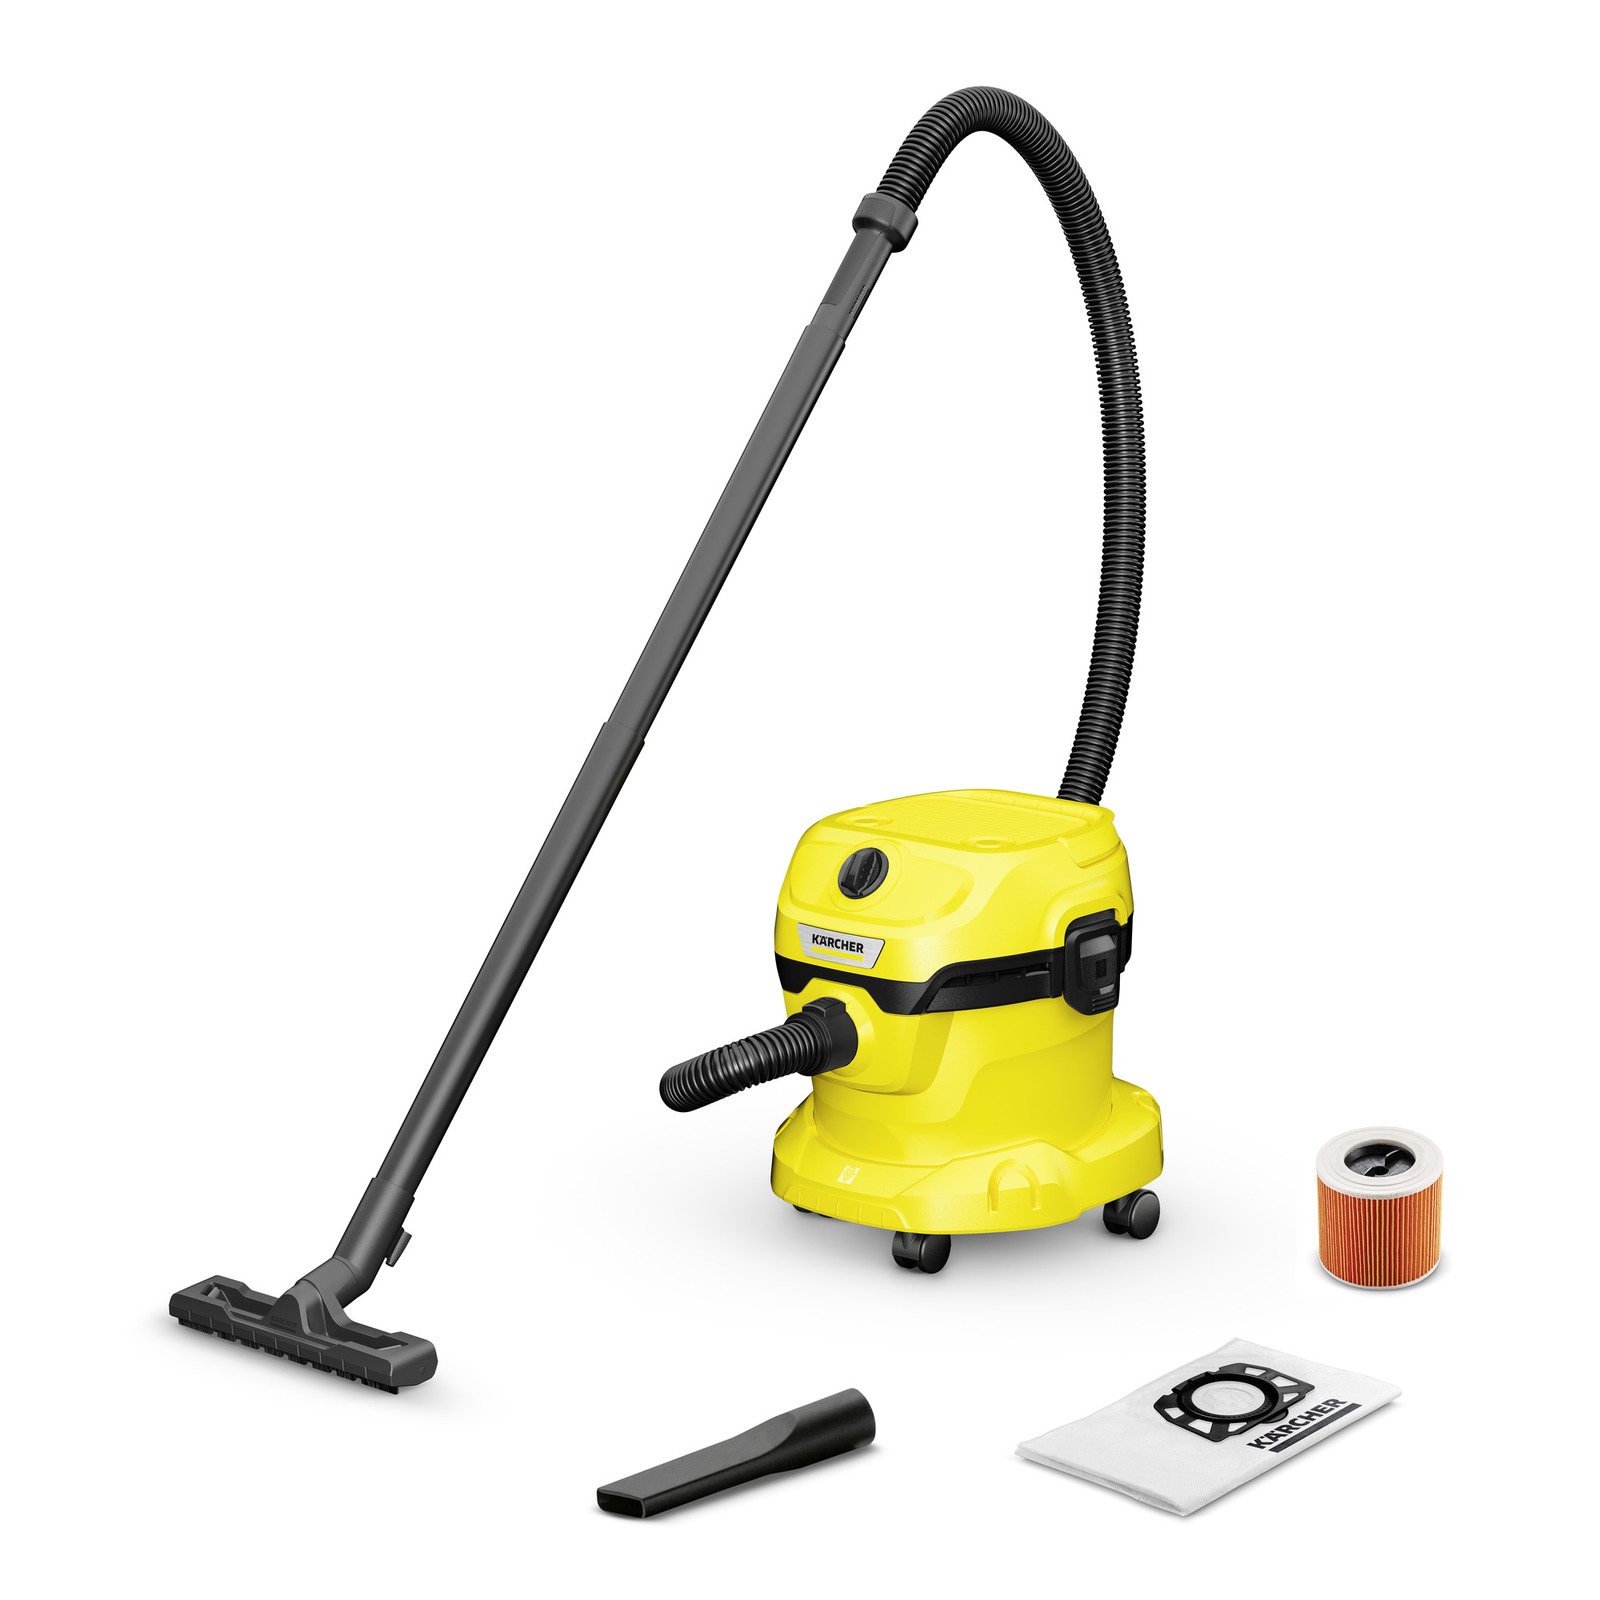 A Karcher WD 2 PLUS wet & dry vacuum cleaner with a flexible hose and attachments, including a floor nozzle and a crevice tool, beside a spare filter and a user manual.